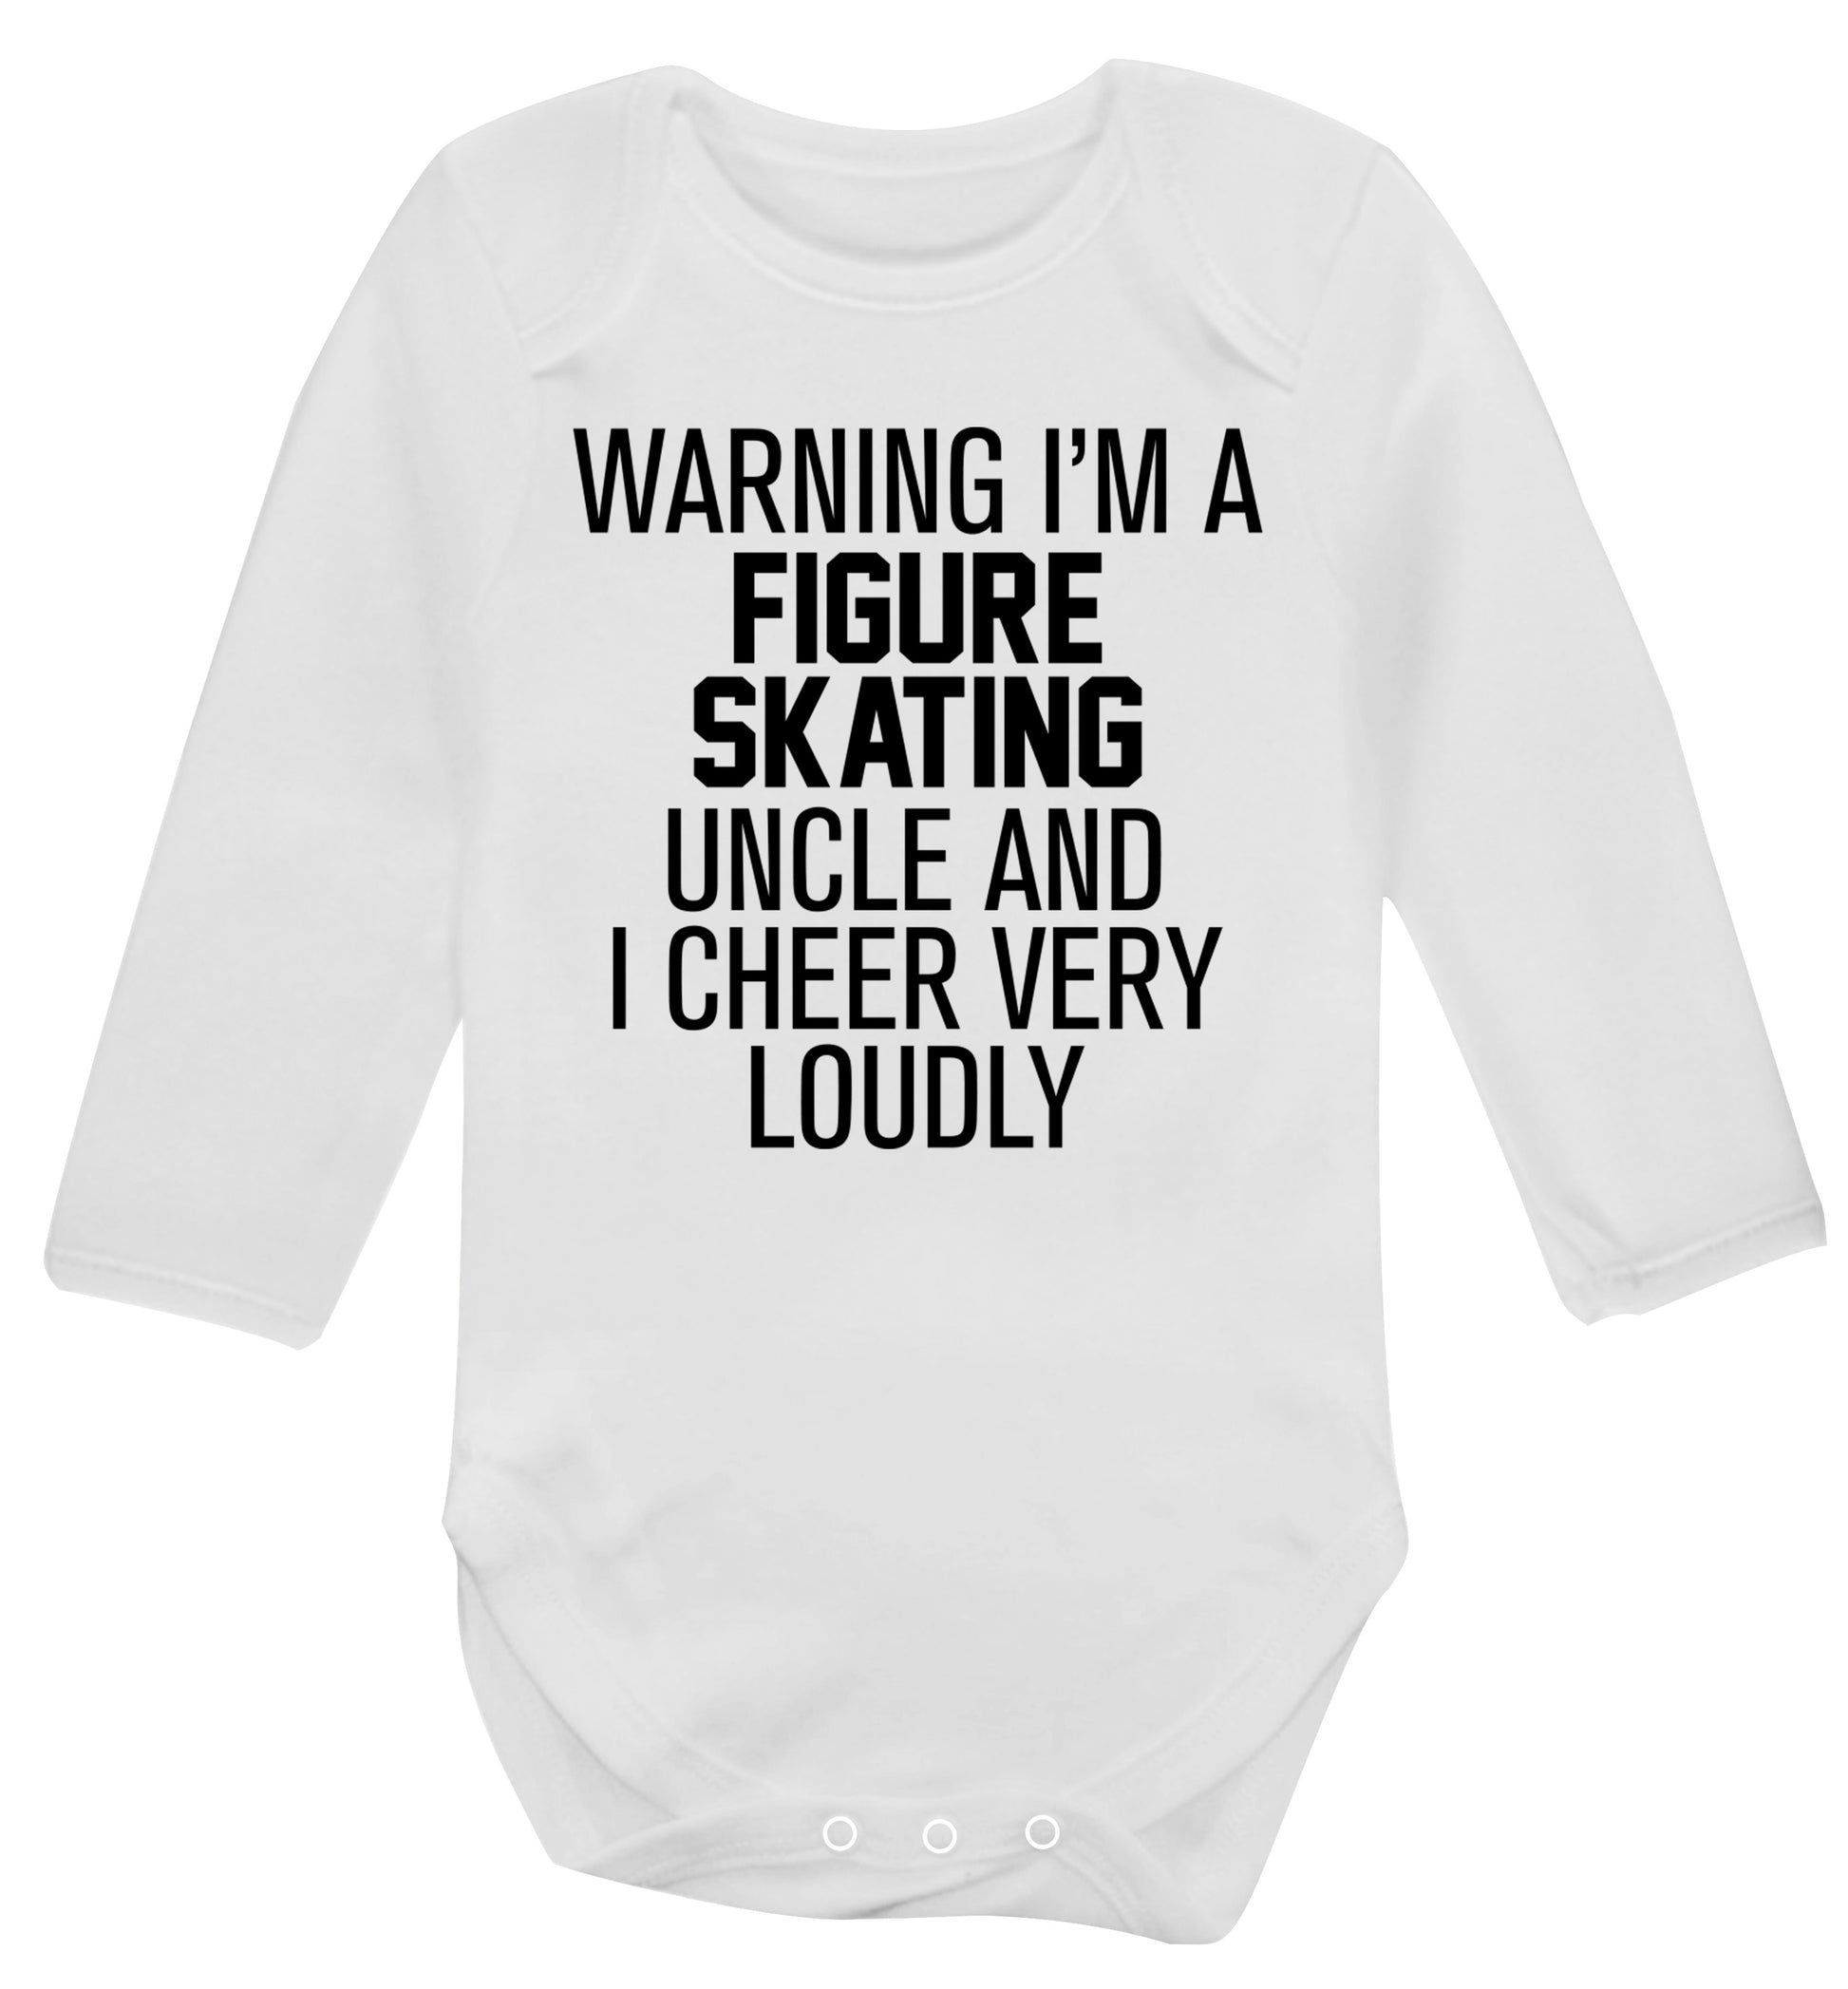 Warning I'm a figure skating uncle and I cheer very loudly Baby Vest long sleeved white 6-12 months